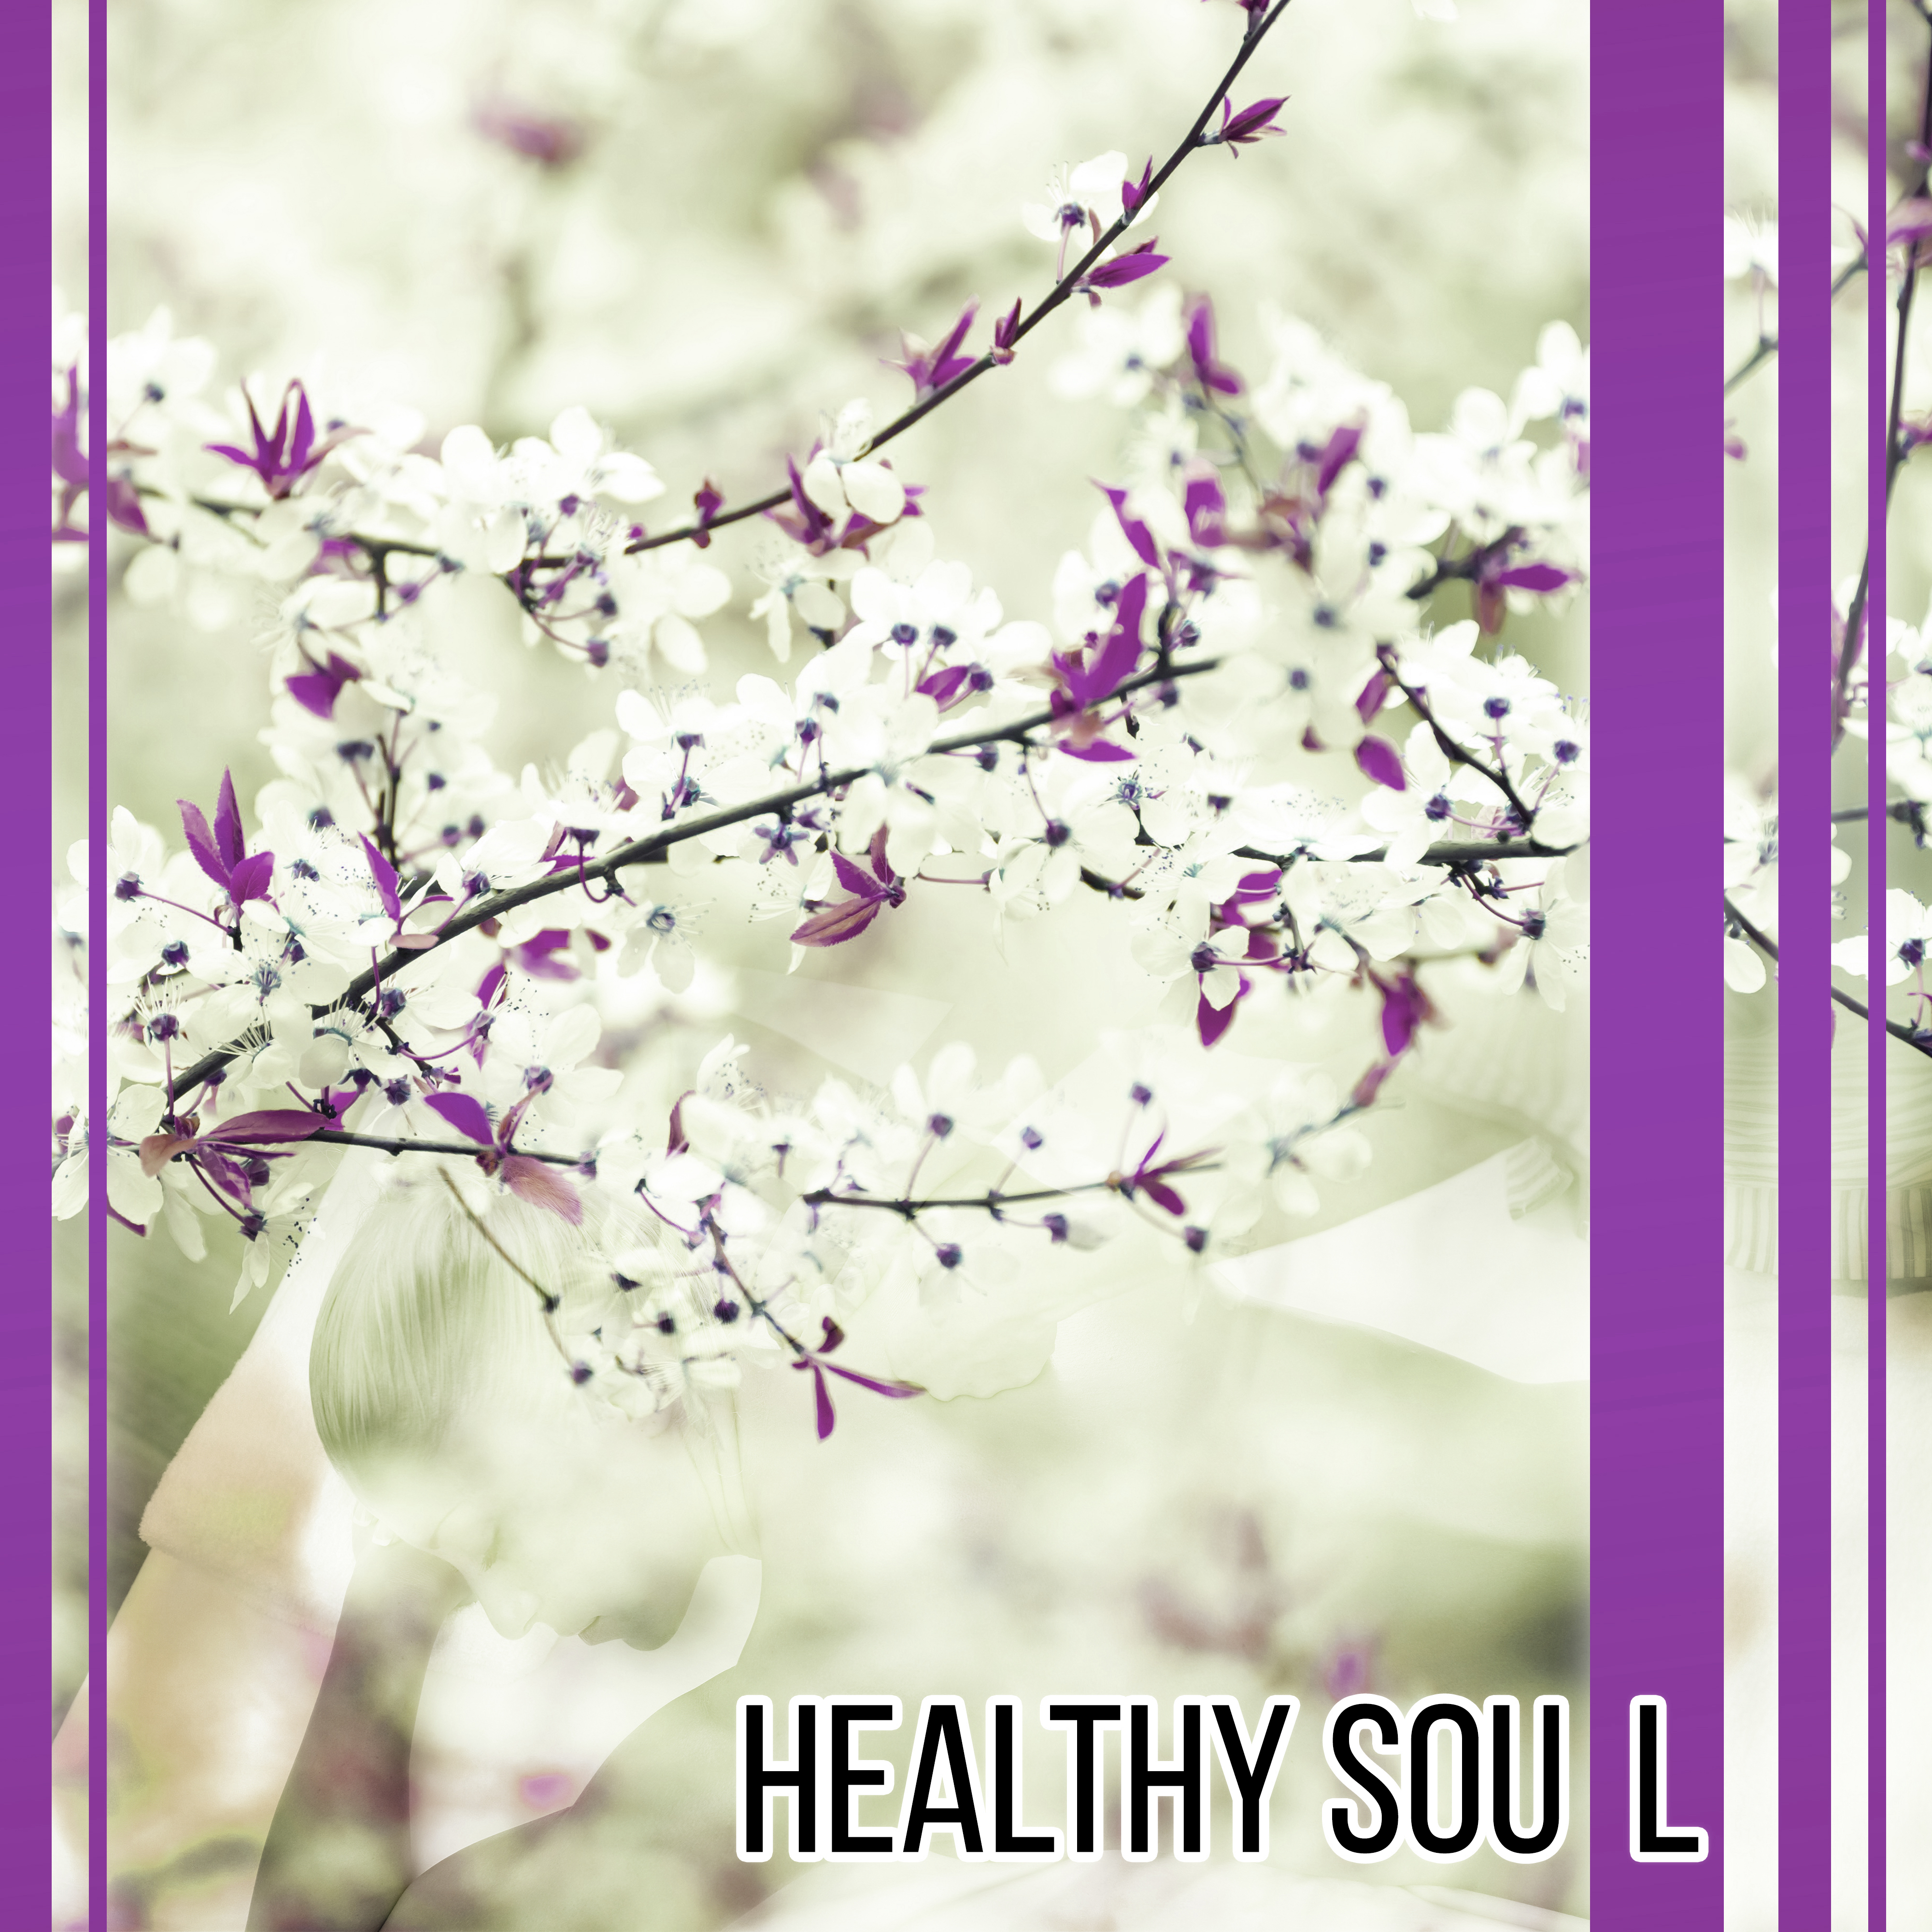 Healthy Soul – Relaxation Sounds for Wellness, Spa Music, Deep Massage, Reiki Music, Beauty for Body, Asian Spa, Healing Melodies for Relaxation